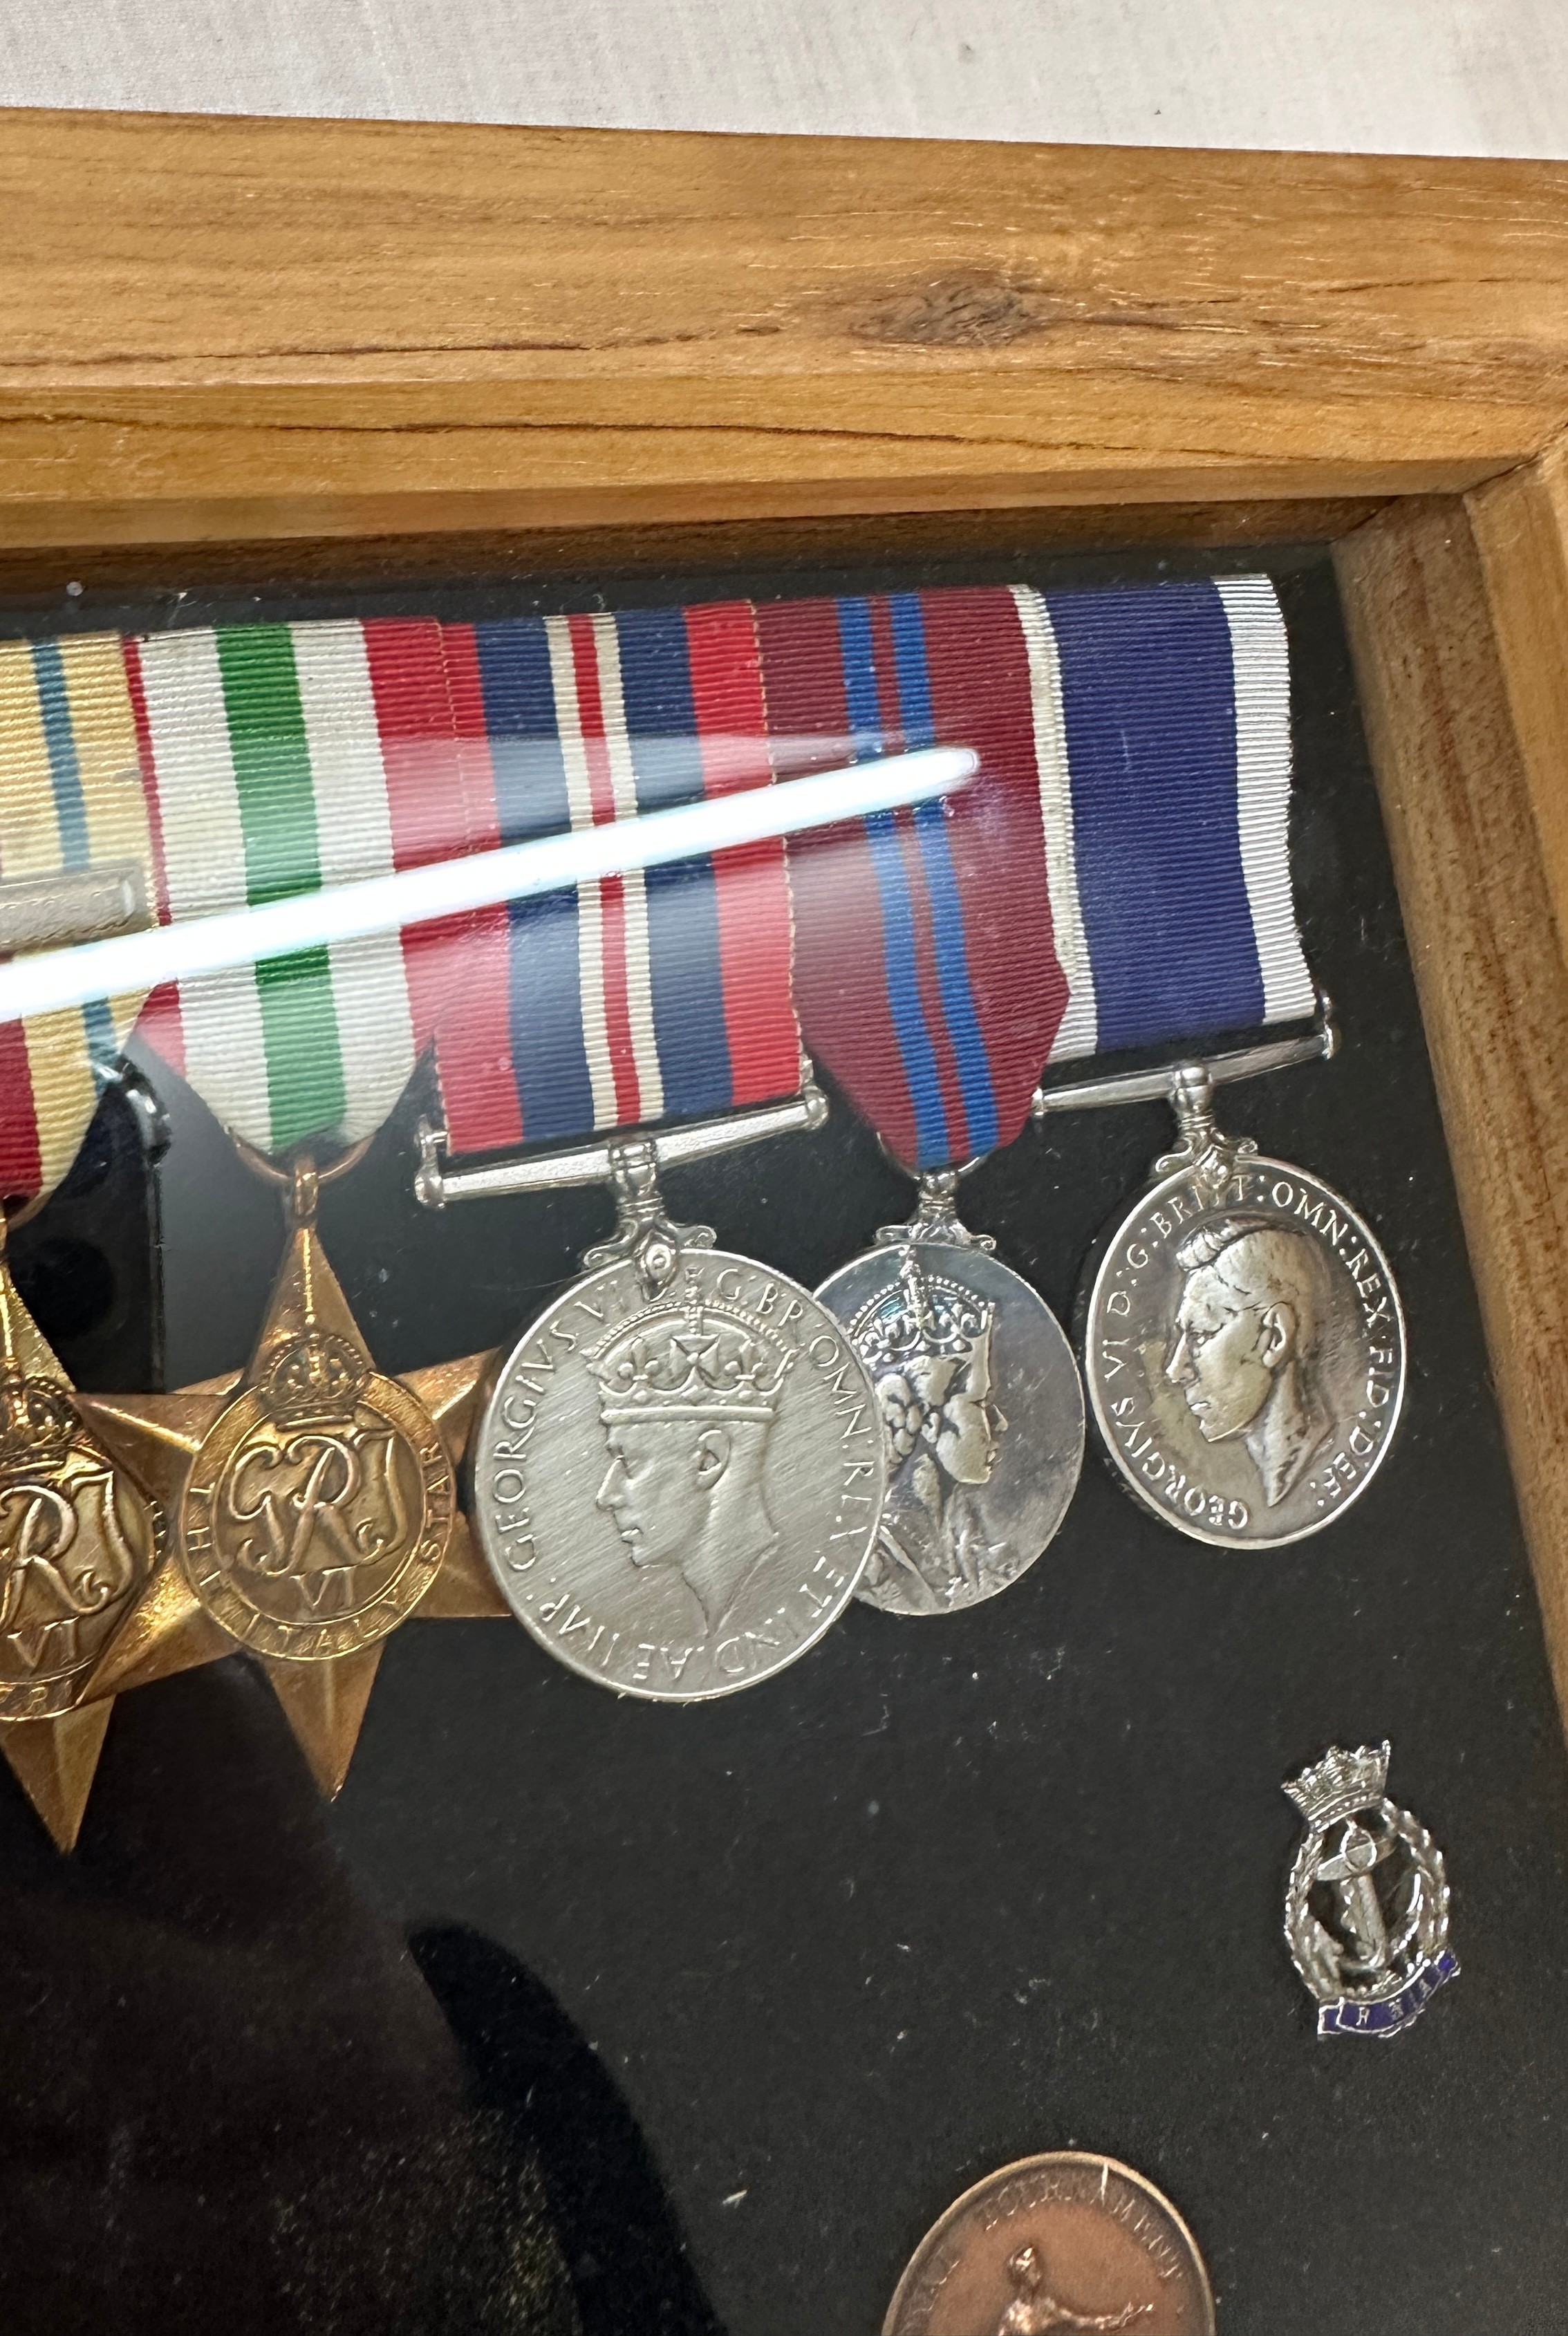 Cased WW2 medal set to Lewis Keens Chief Petty Officer JX 141277, includes Long service medal, paper - Image 8 of 14